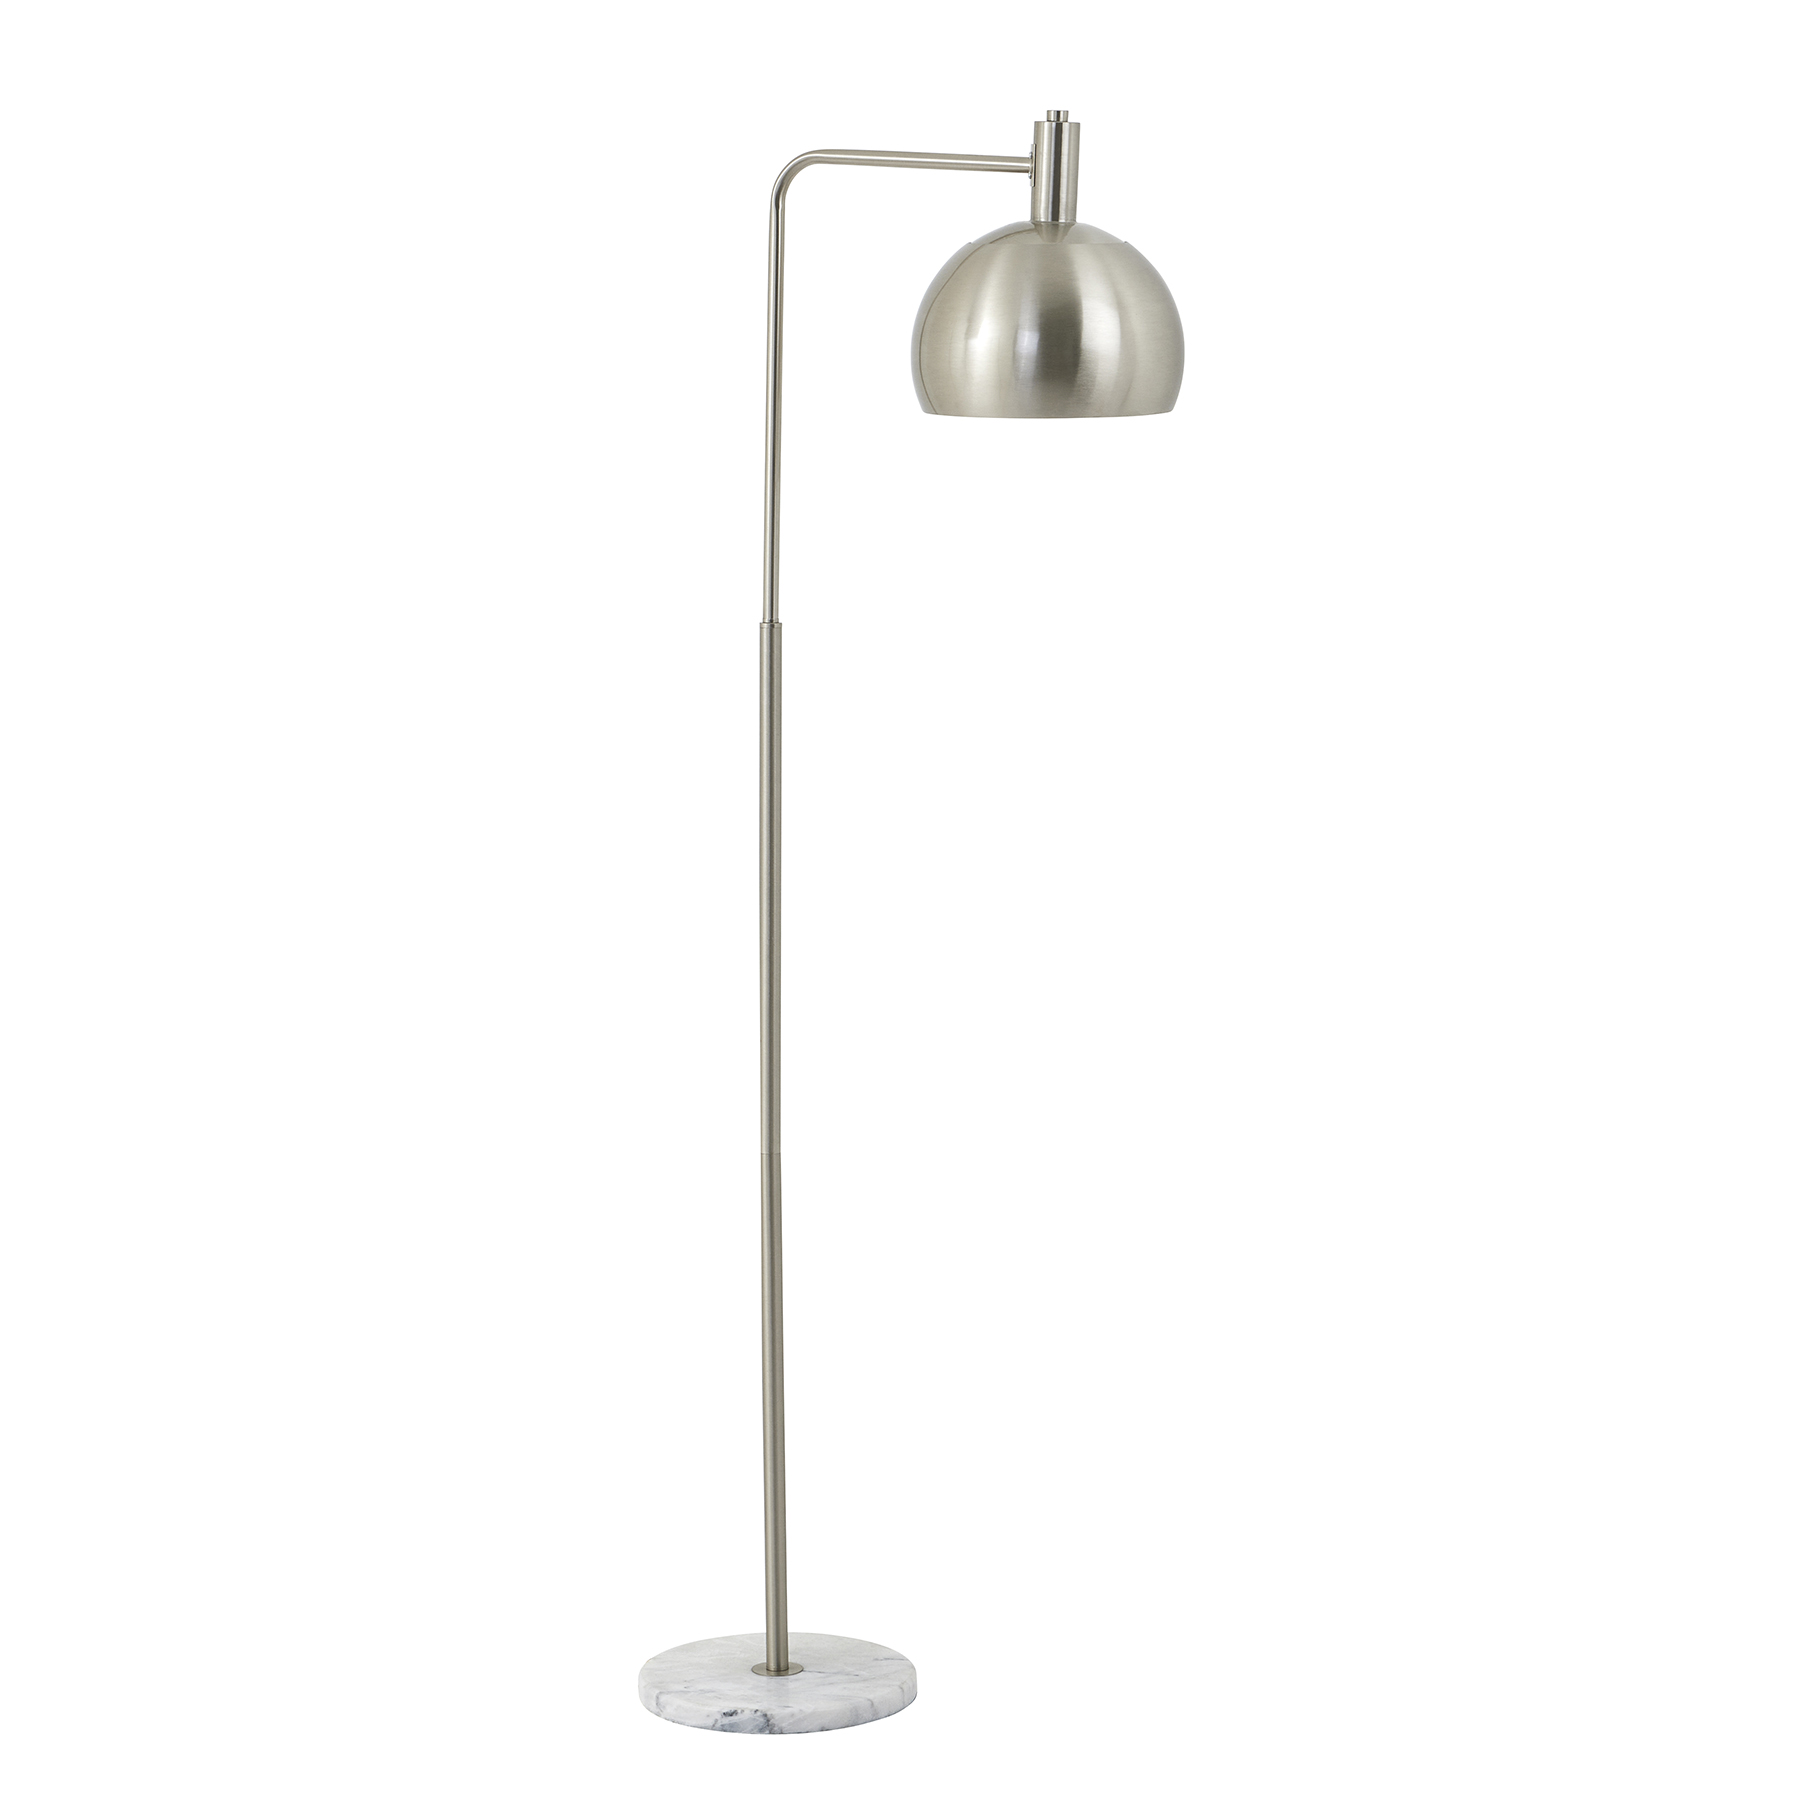 Marble And Silver Industrial Adjustable Floor Lamp - Image 1